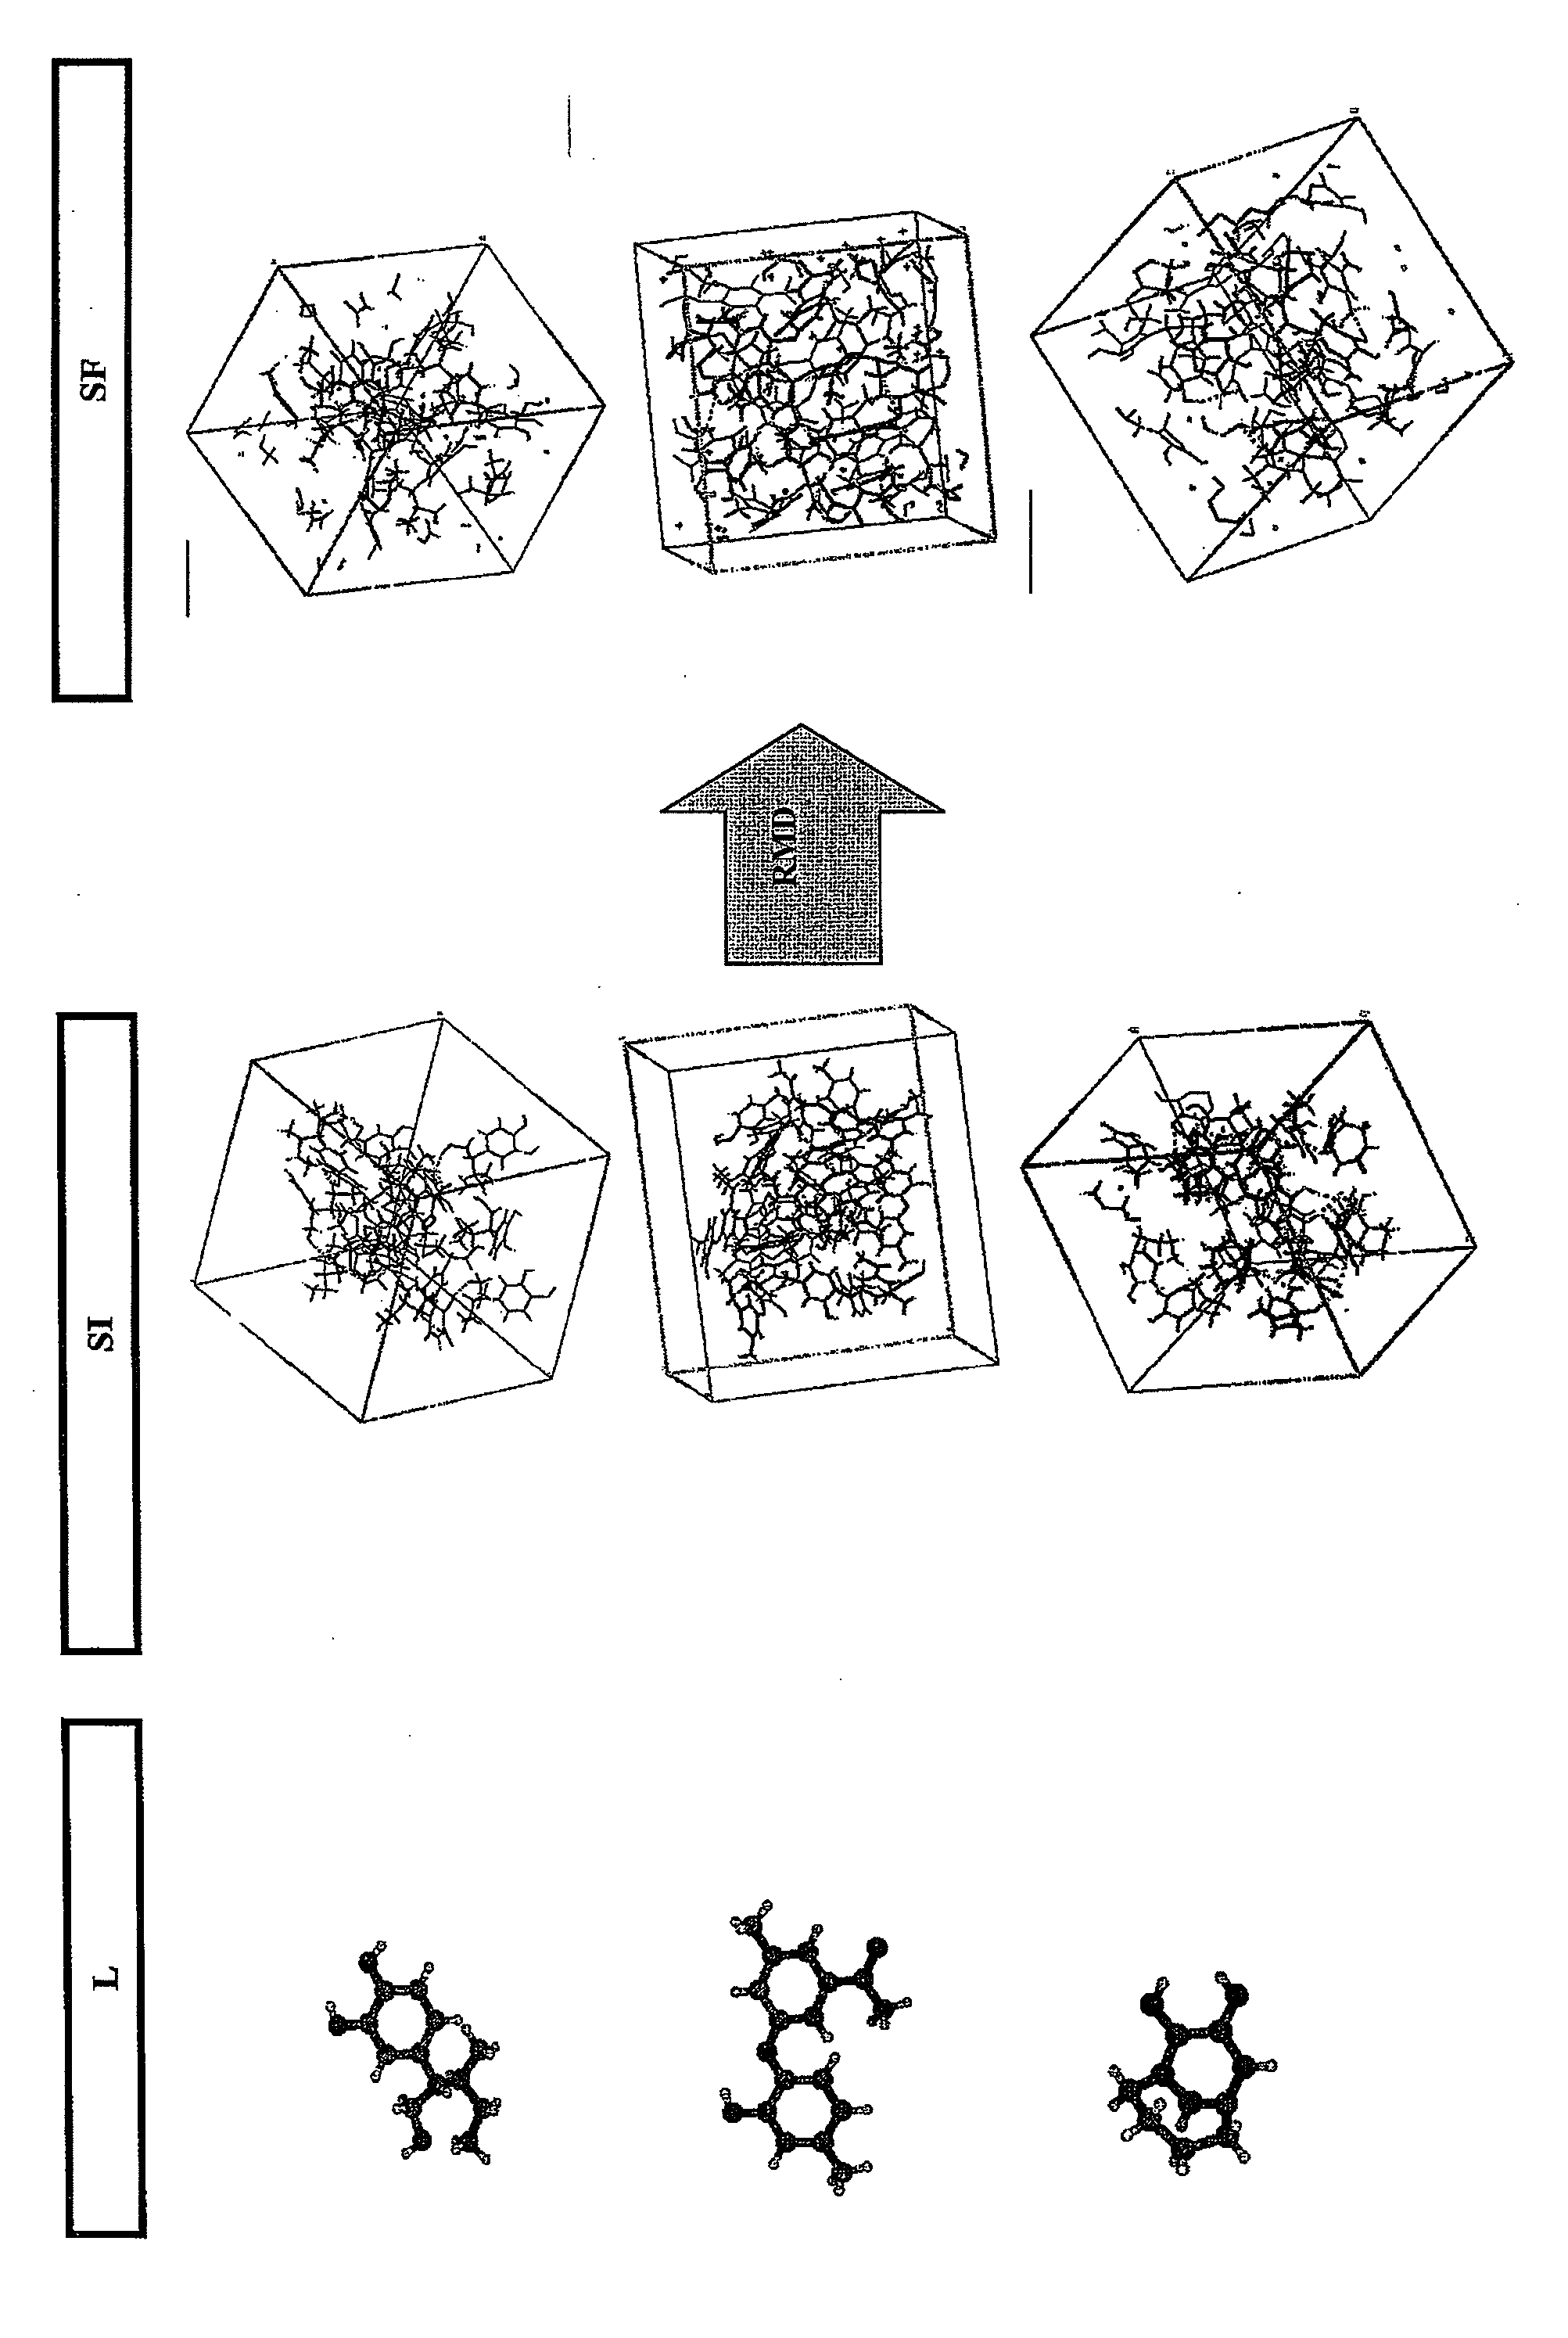 Method of quantifying hydrocarbon formation and retention in a mother rock